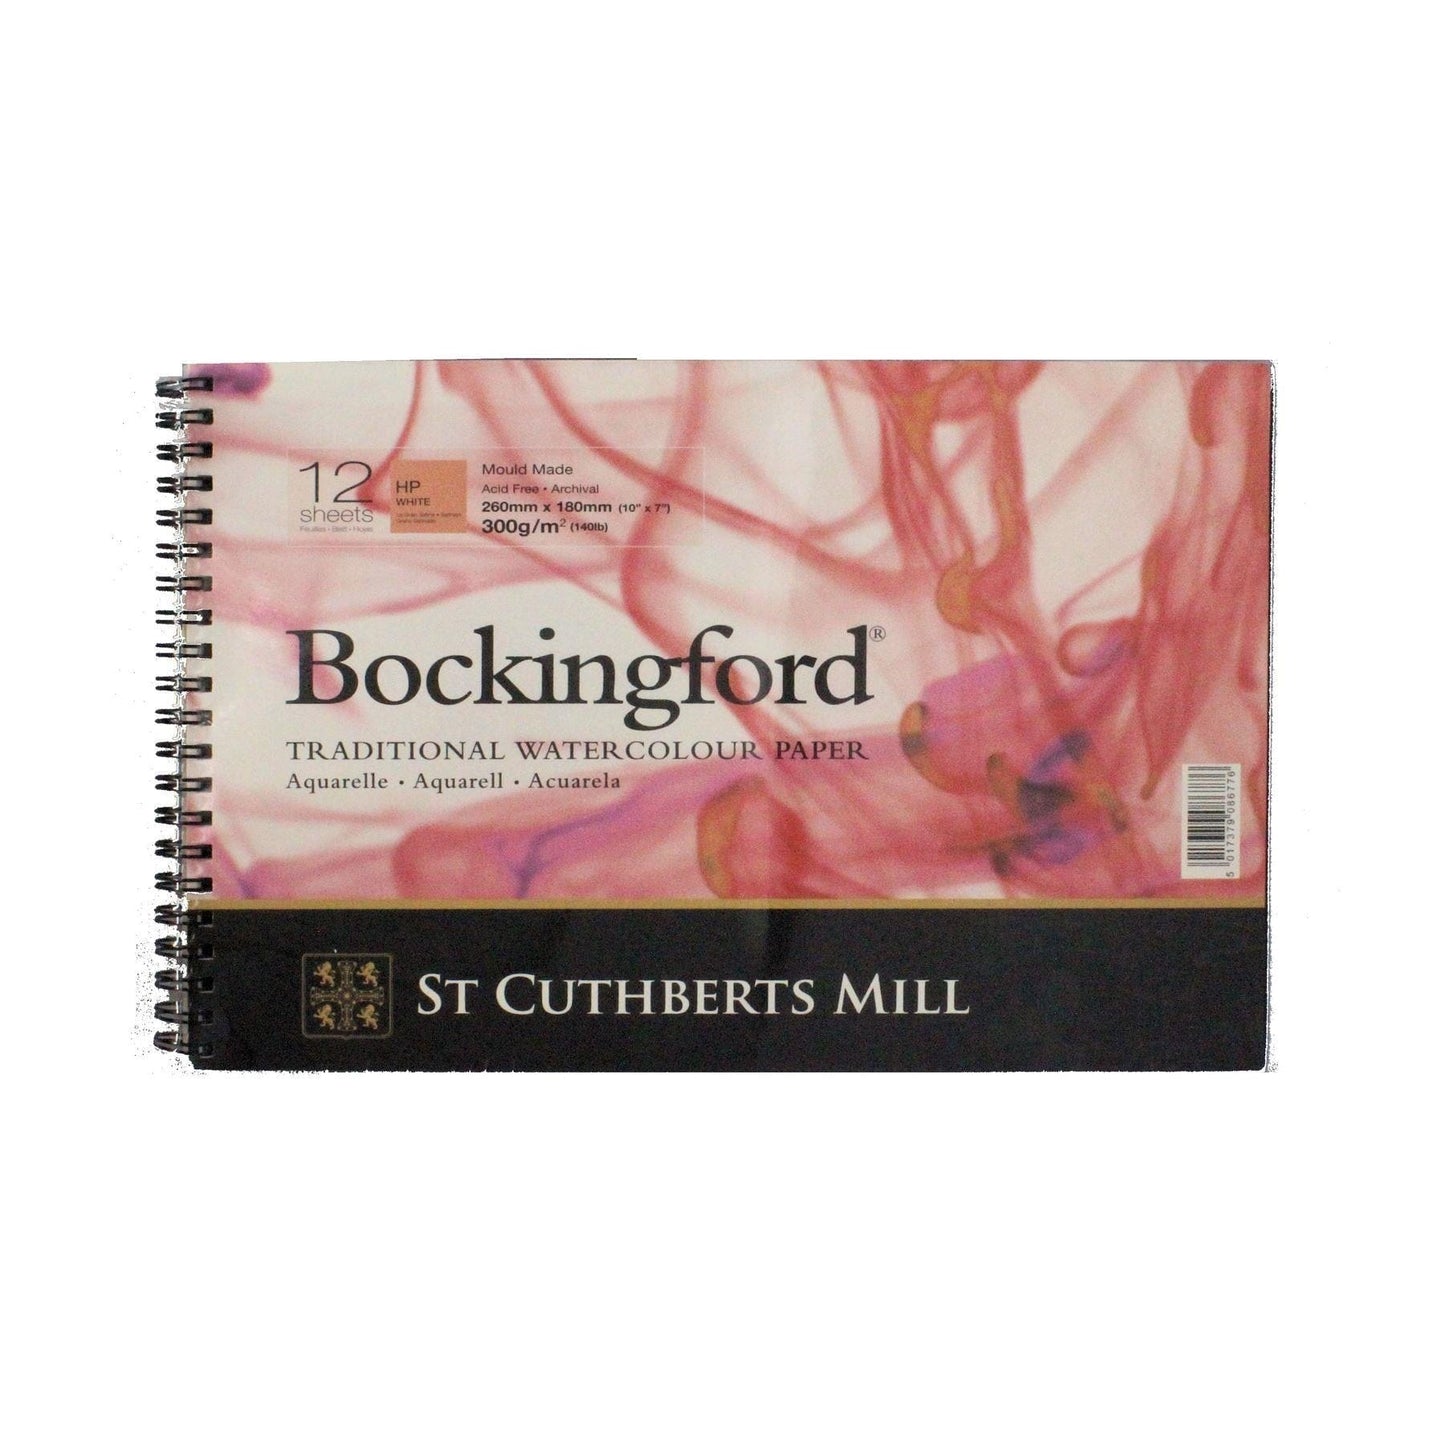  St. Cuthberts Mill Bockingford Watercolor Paper Pad -  10x7-inch White Water Color Paper for Artists - 12 Sheets of 140lb Cold  Press Watercolor Paper for Gouache Ink Acrylic Charcoal and